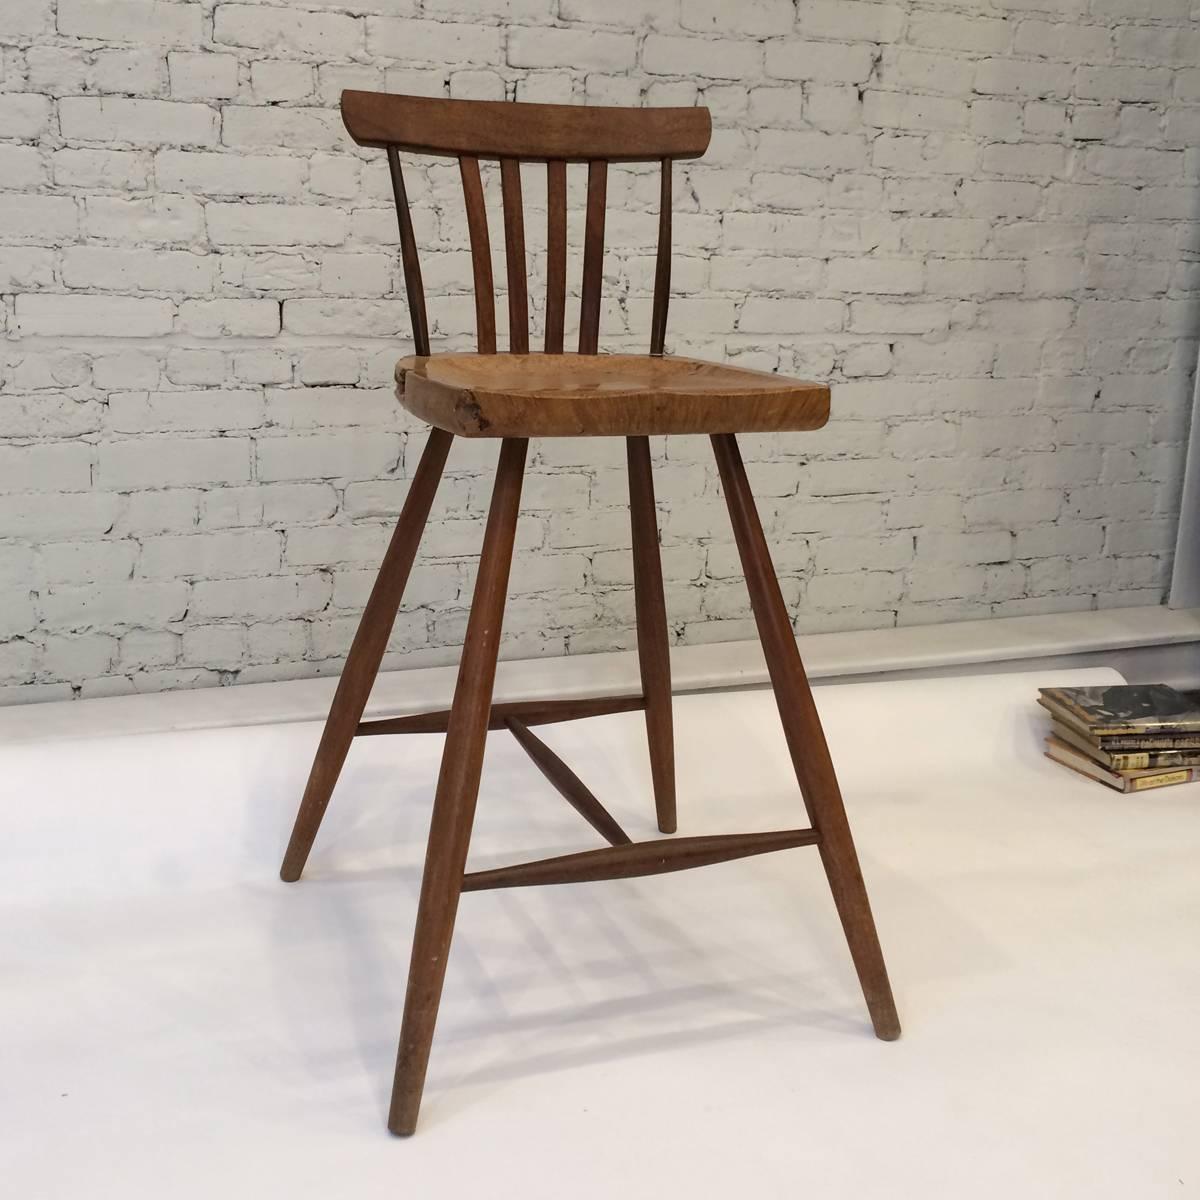 Wharton Esherick- inspired single bar stool with a thick carved seat made from a slab of maple burl, with base and back constructed of solid walnut.